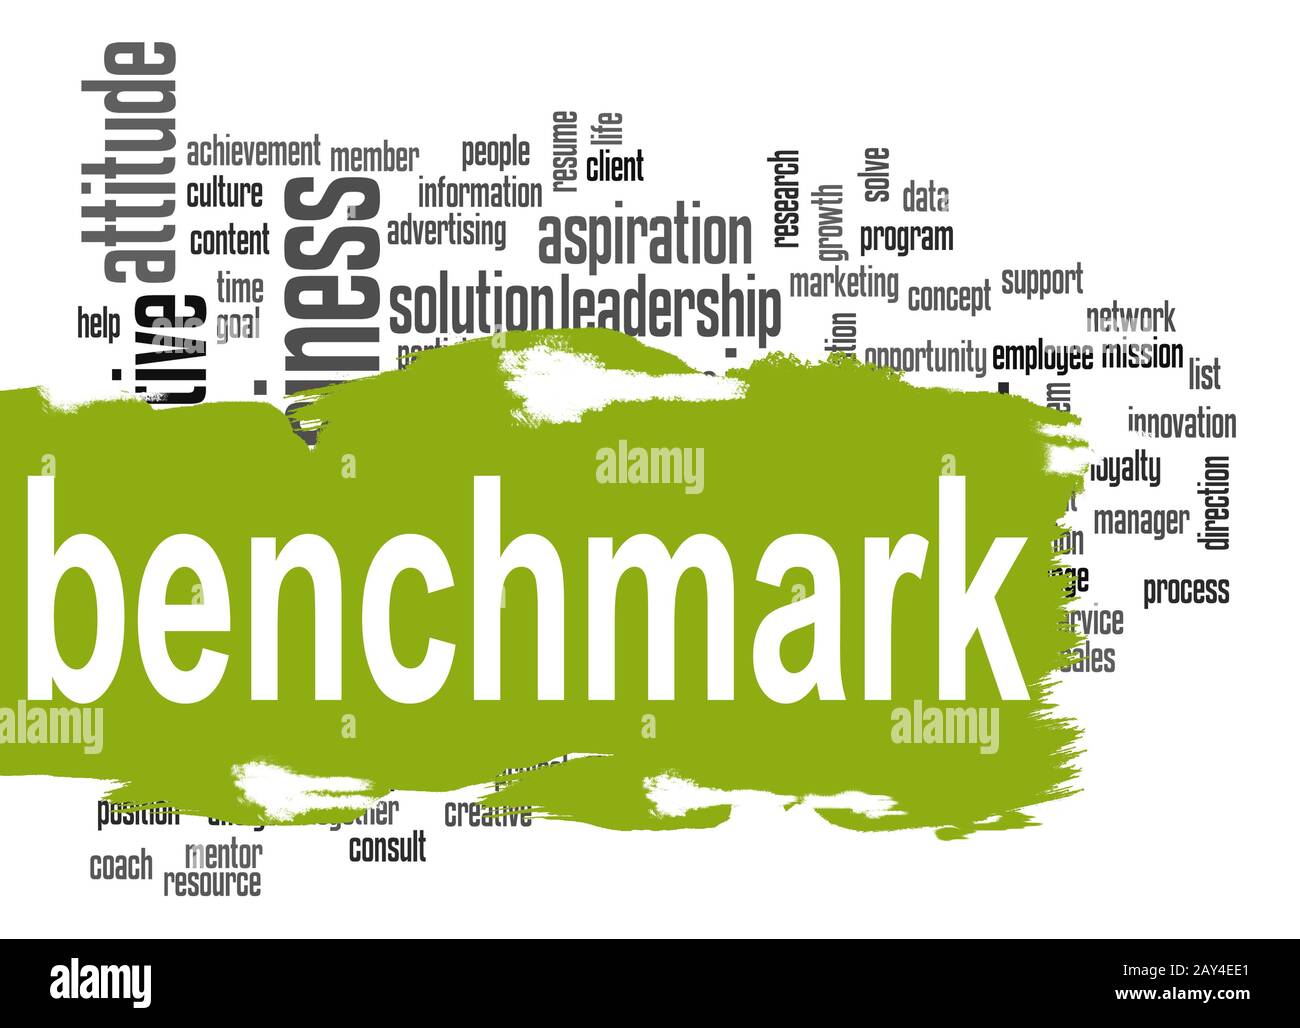 Benchmark word cloud with green banner Stock Photo